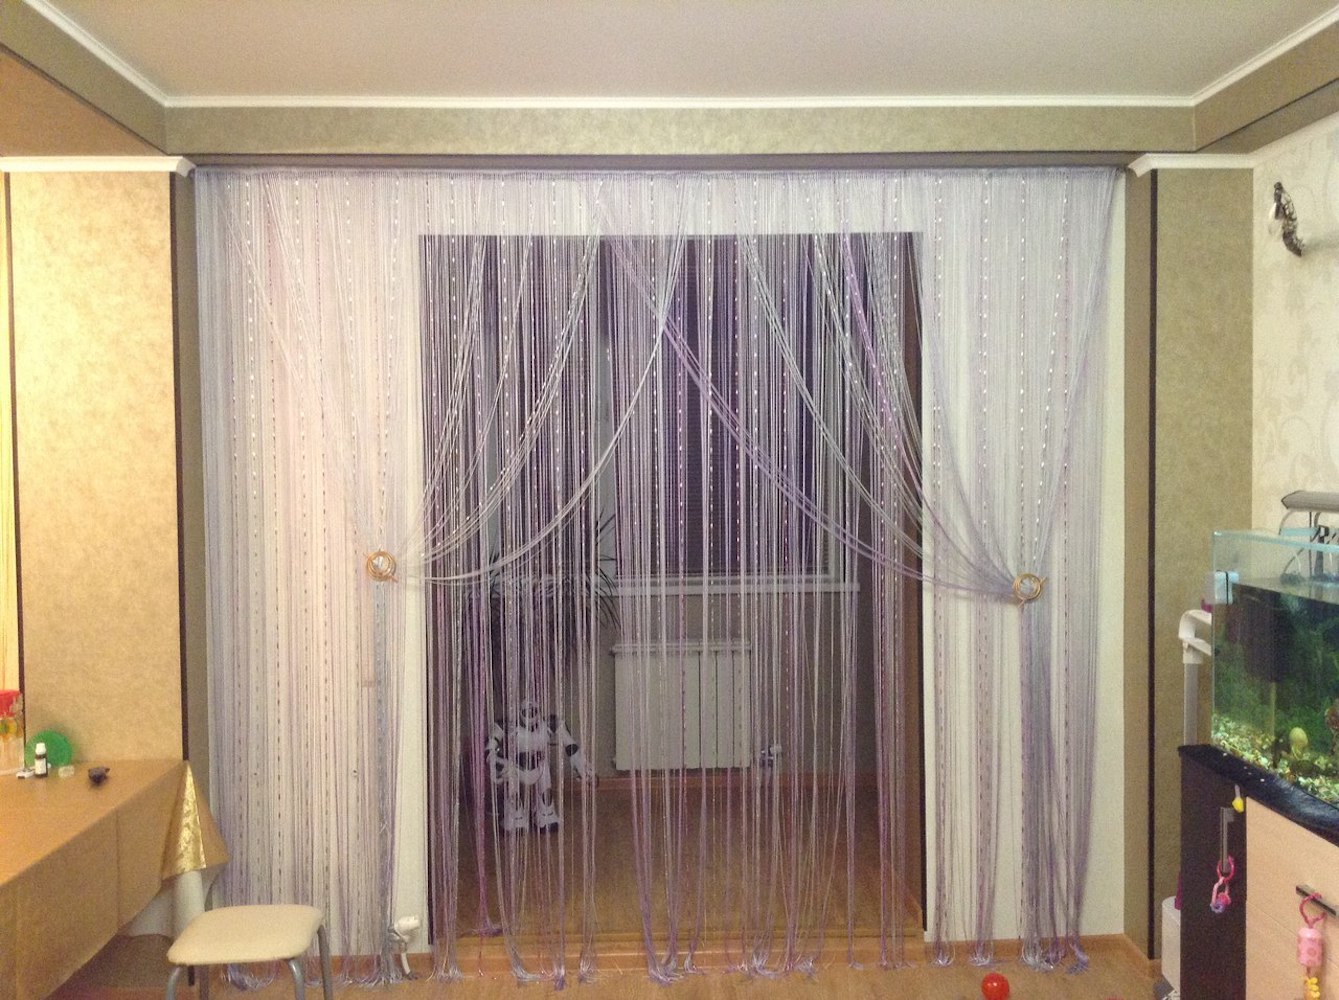 Rope room curtains